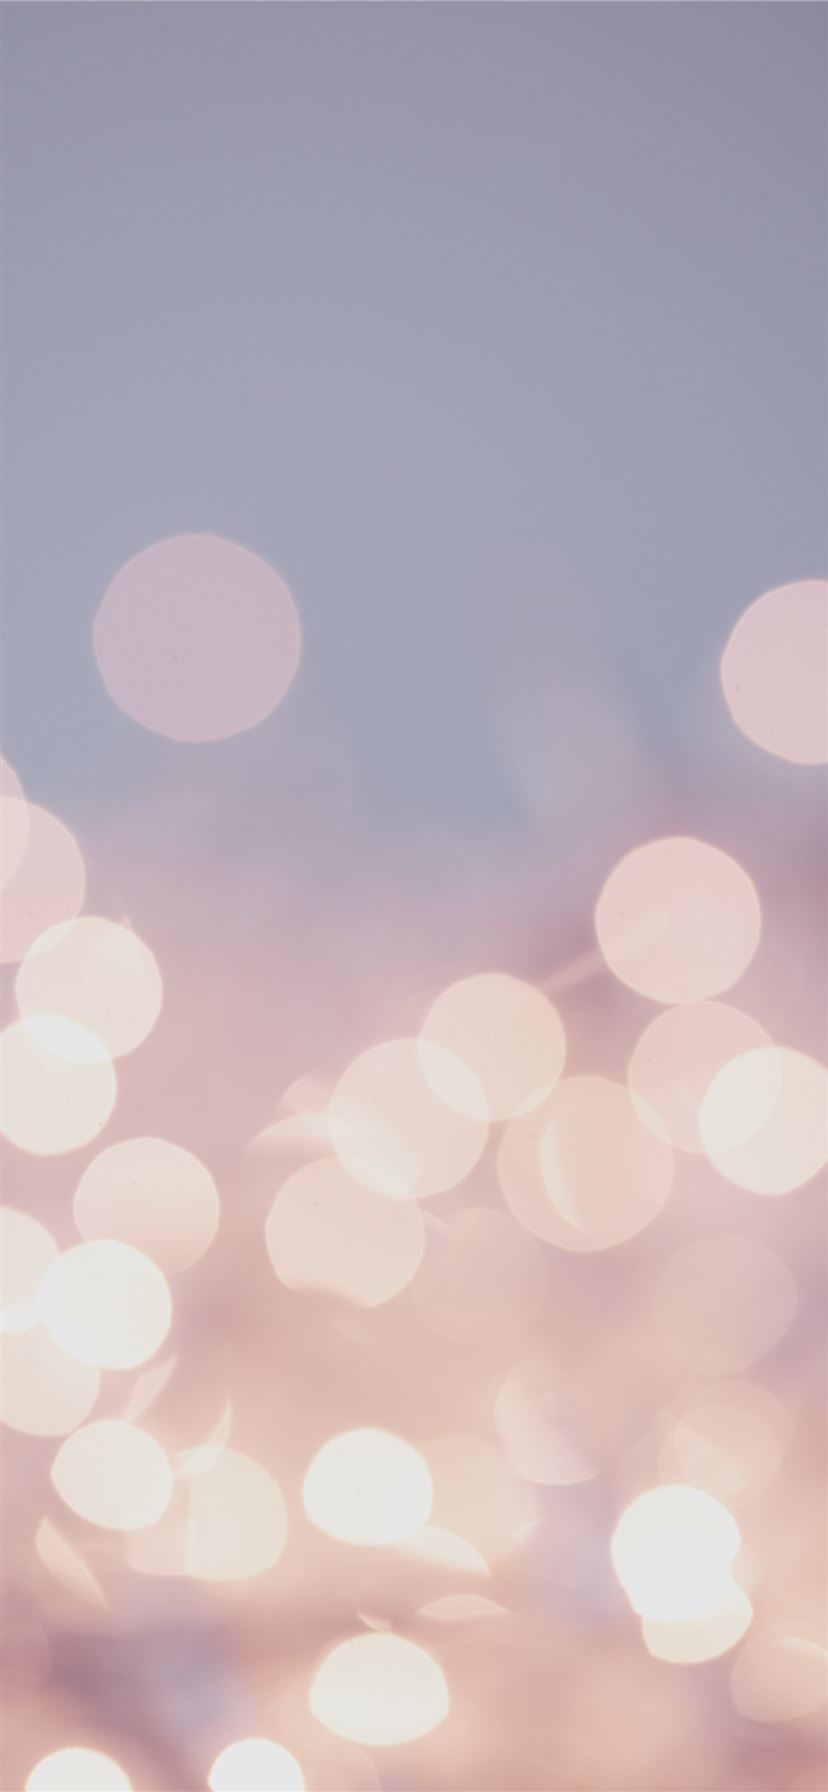 Pastel Neutral Iphone Wallpapers